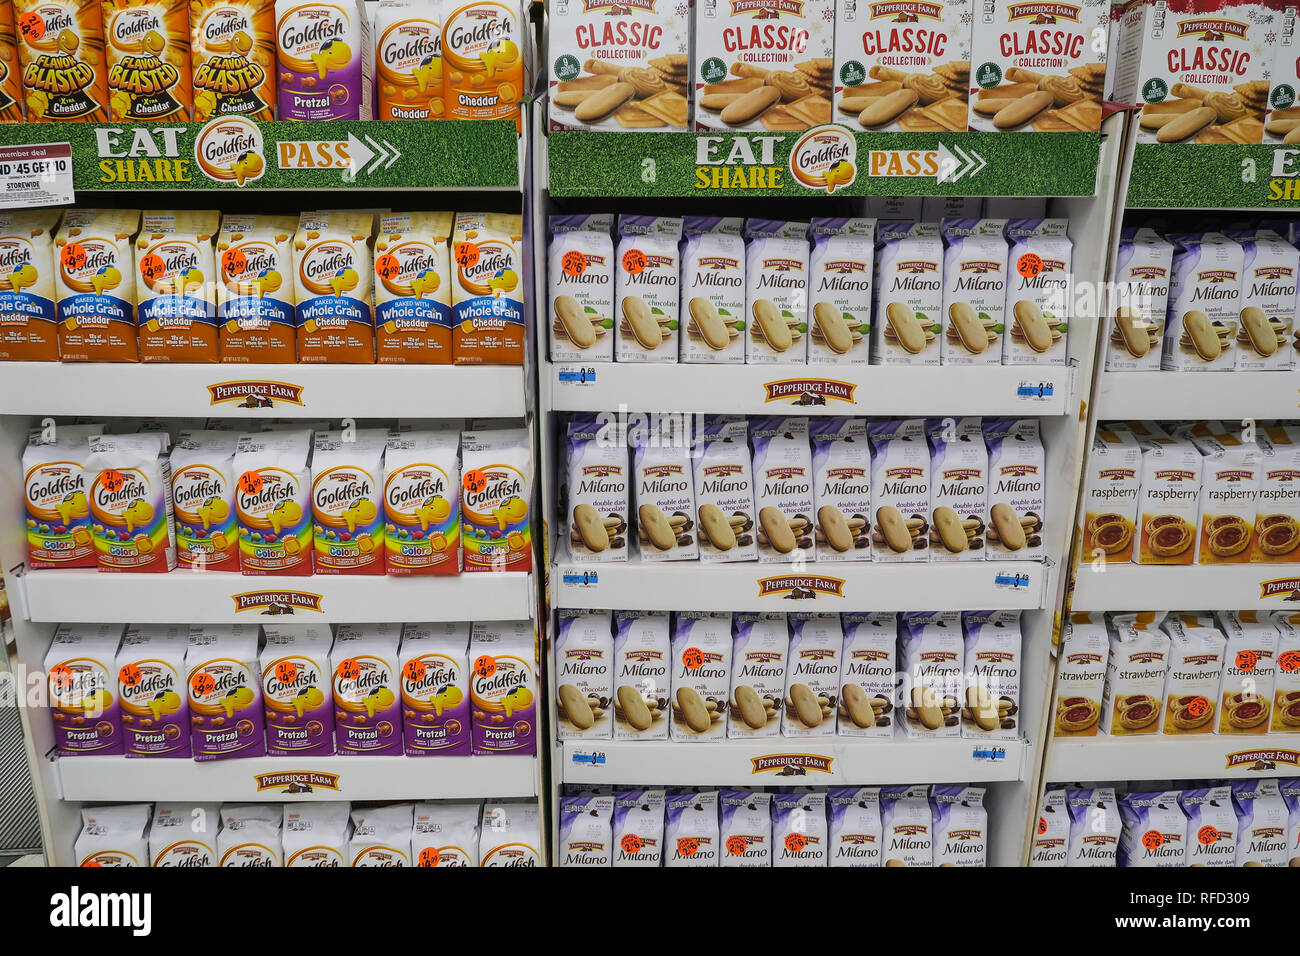 Display of Pepperidge Farm Snacks and Cookies in Kmart, NYC, USA Stock Photo